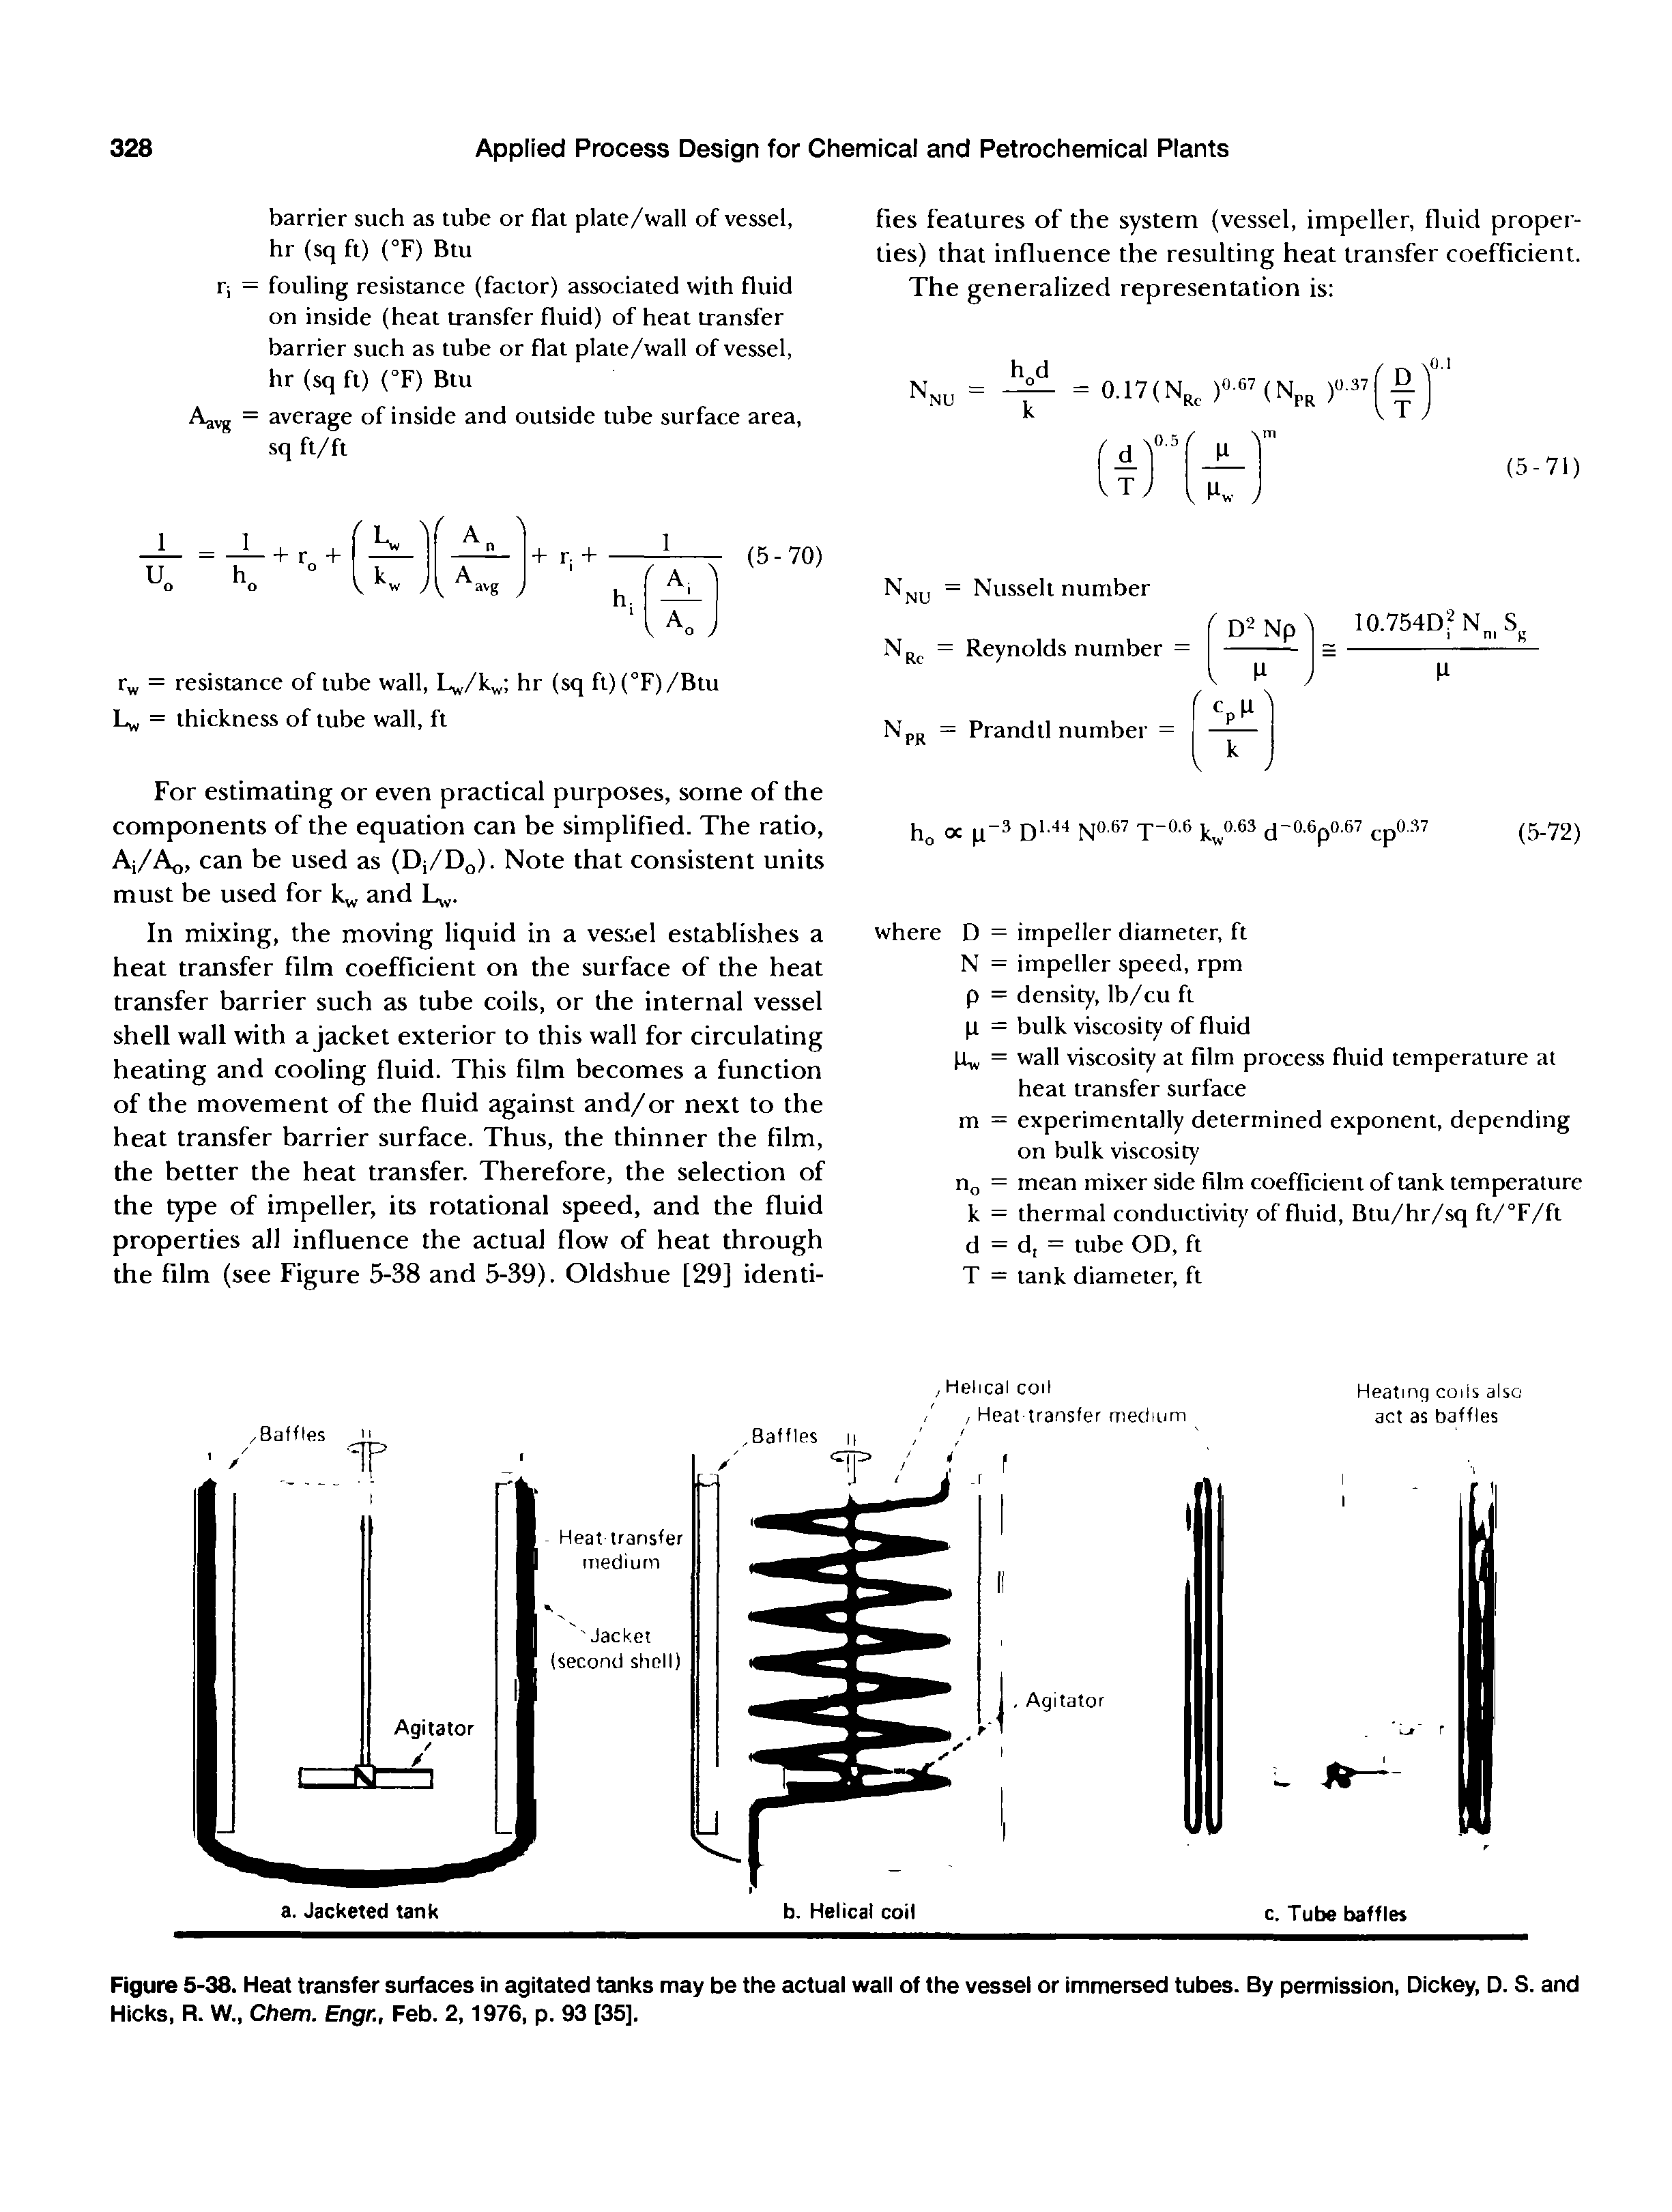 Figure 5-38. Heat transfer surfaces in agitated teinks may be the actual wall of the vessel or immersed tubes. By permission, Dickey, D. S. and Hicks, R. W., Chem. Engn, Feb. 2,1976, p. 93 [35].